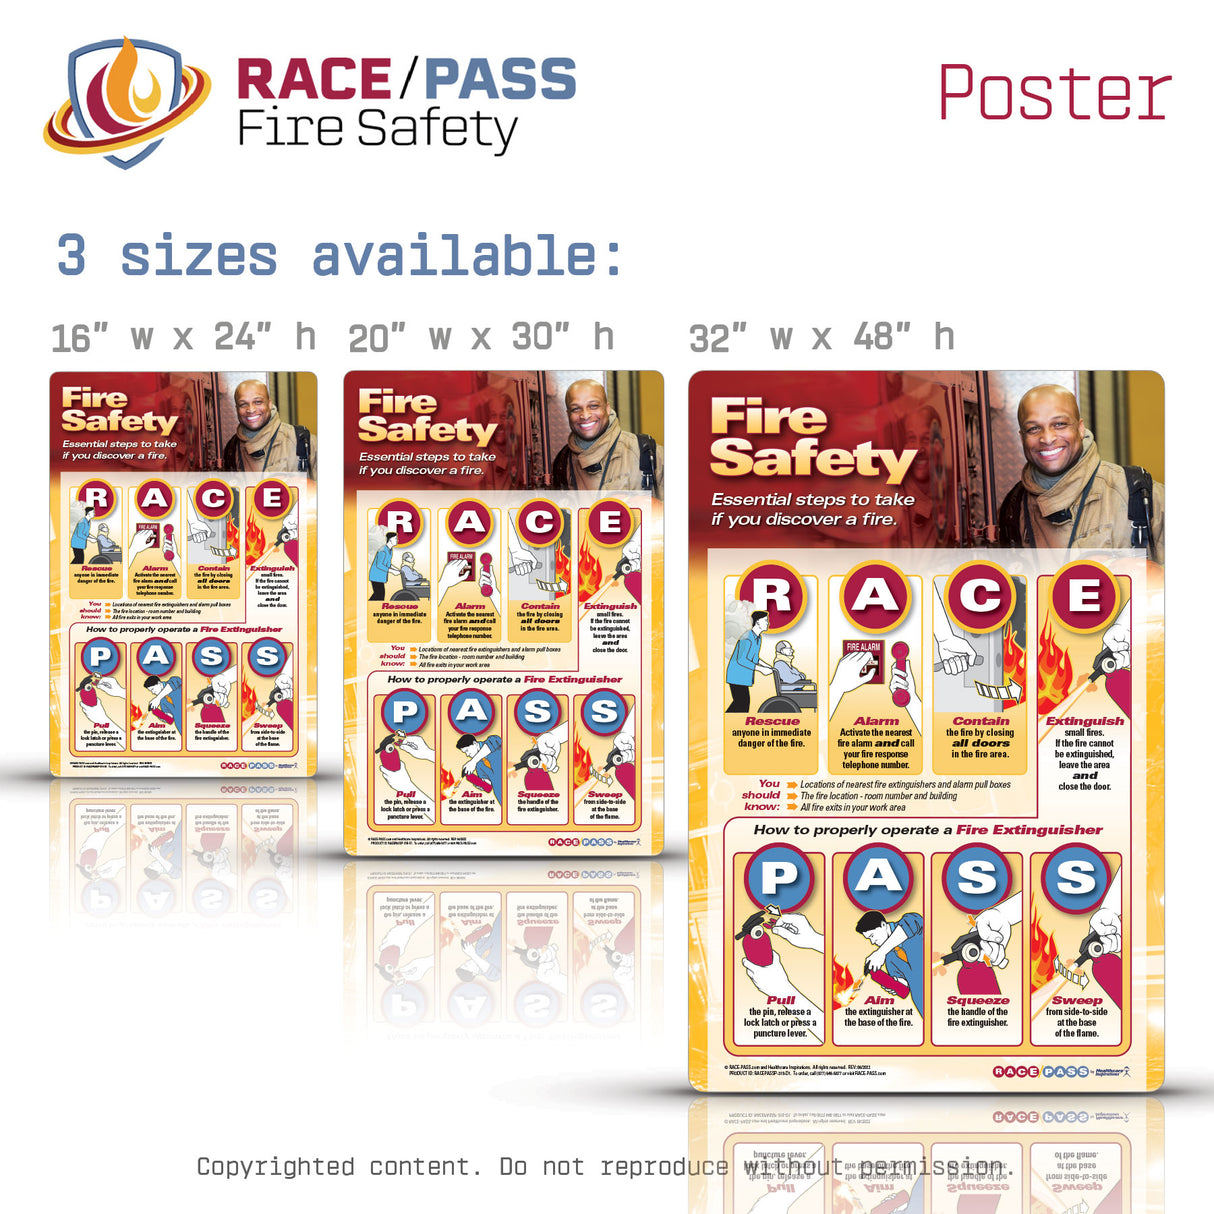 Our RACE/PASS Fire Safety Poster comes in 3 sizes to meet your needs: 16" wide x 24" high, 20" wide x 30" high, and 32" wide x 48" high.  Choose a size that works best for offices, break rooms, by fire extinguishers or fire alarms, or hallways.